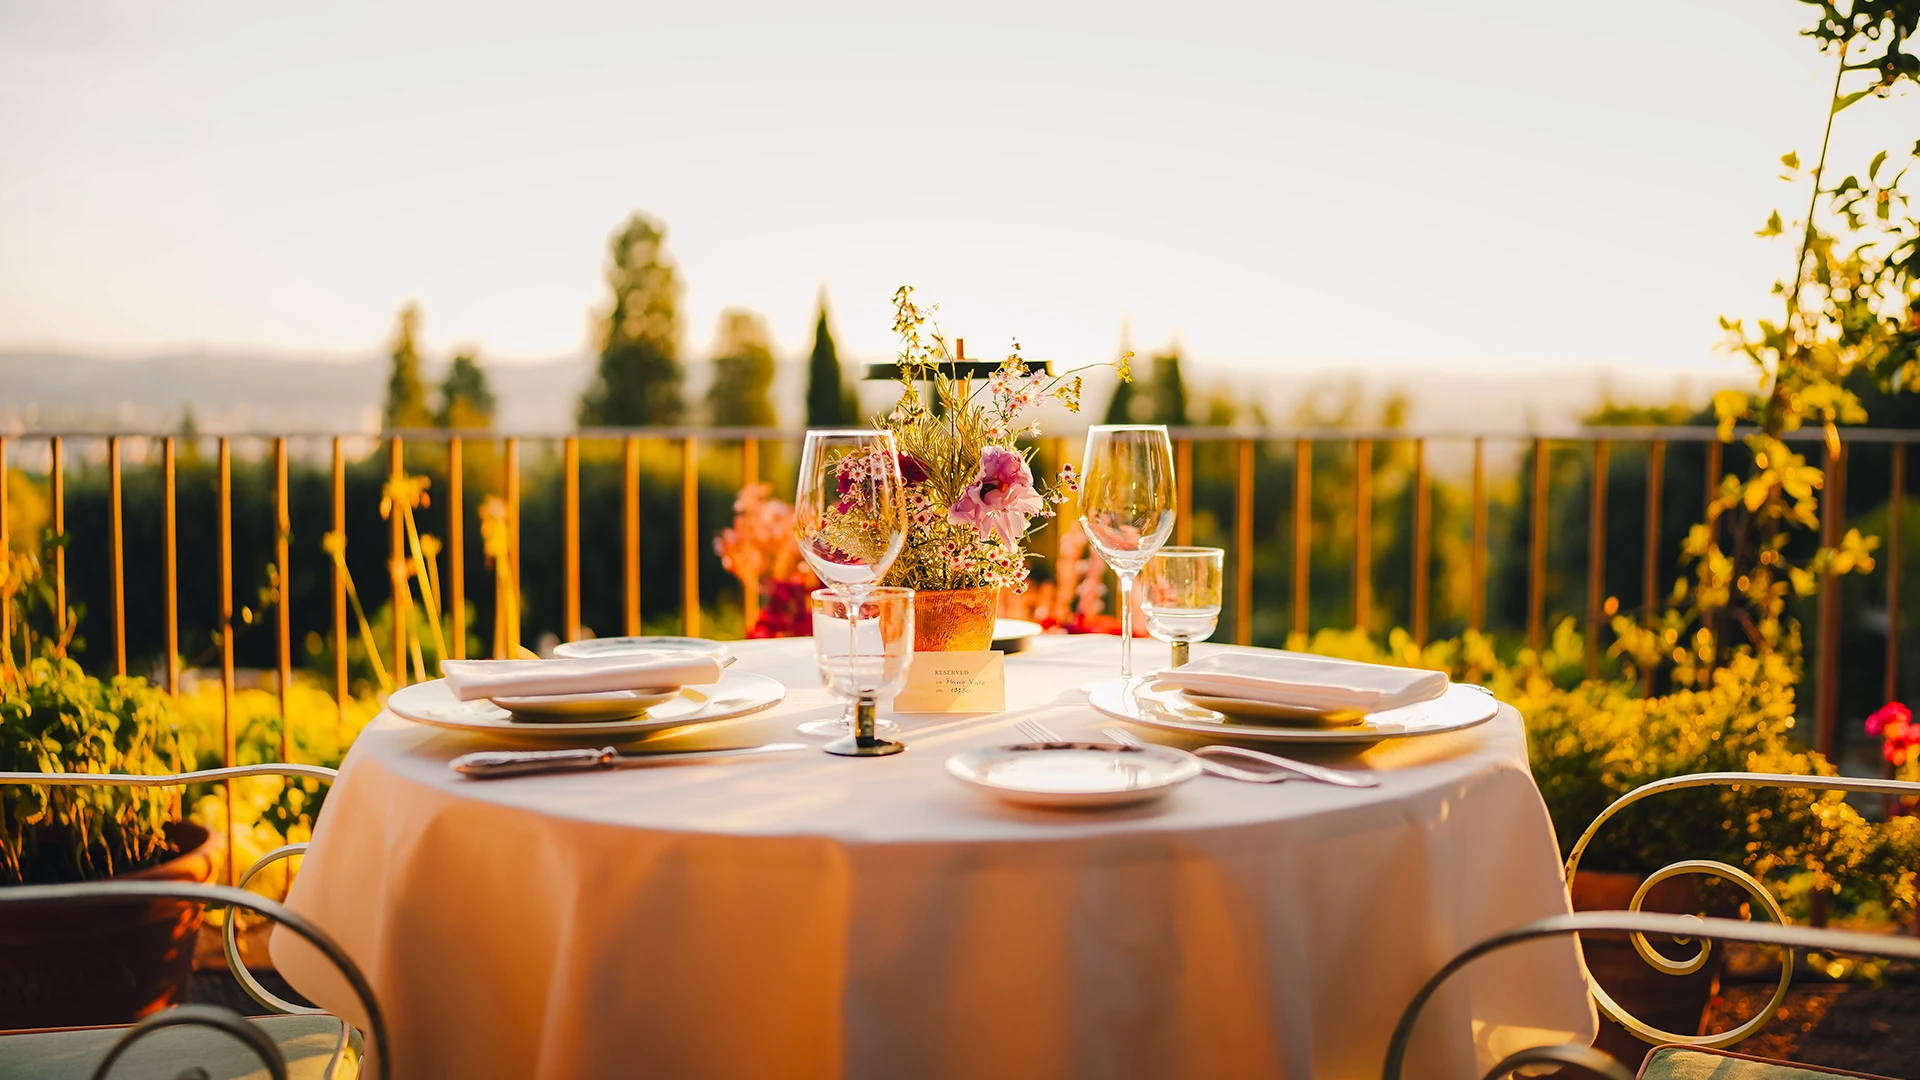 A table at an outdoor restaurant in Tuscany, spread with a white linen table, wine glasses and cutlery - Luxury Escapes